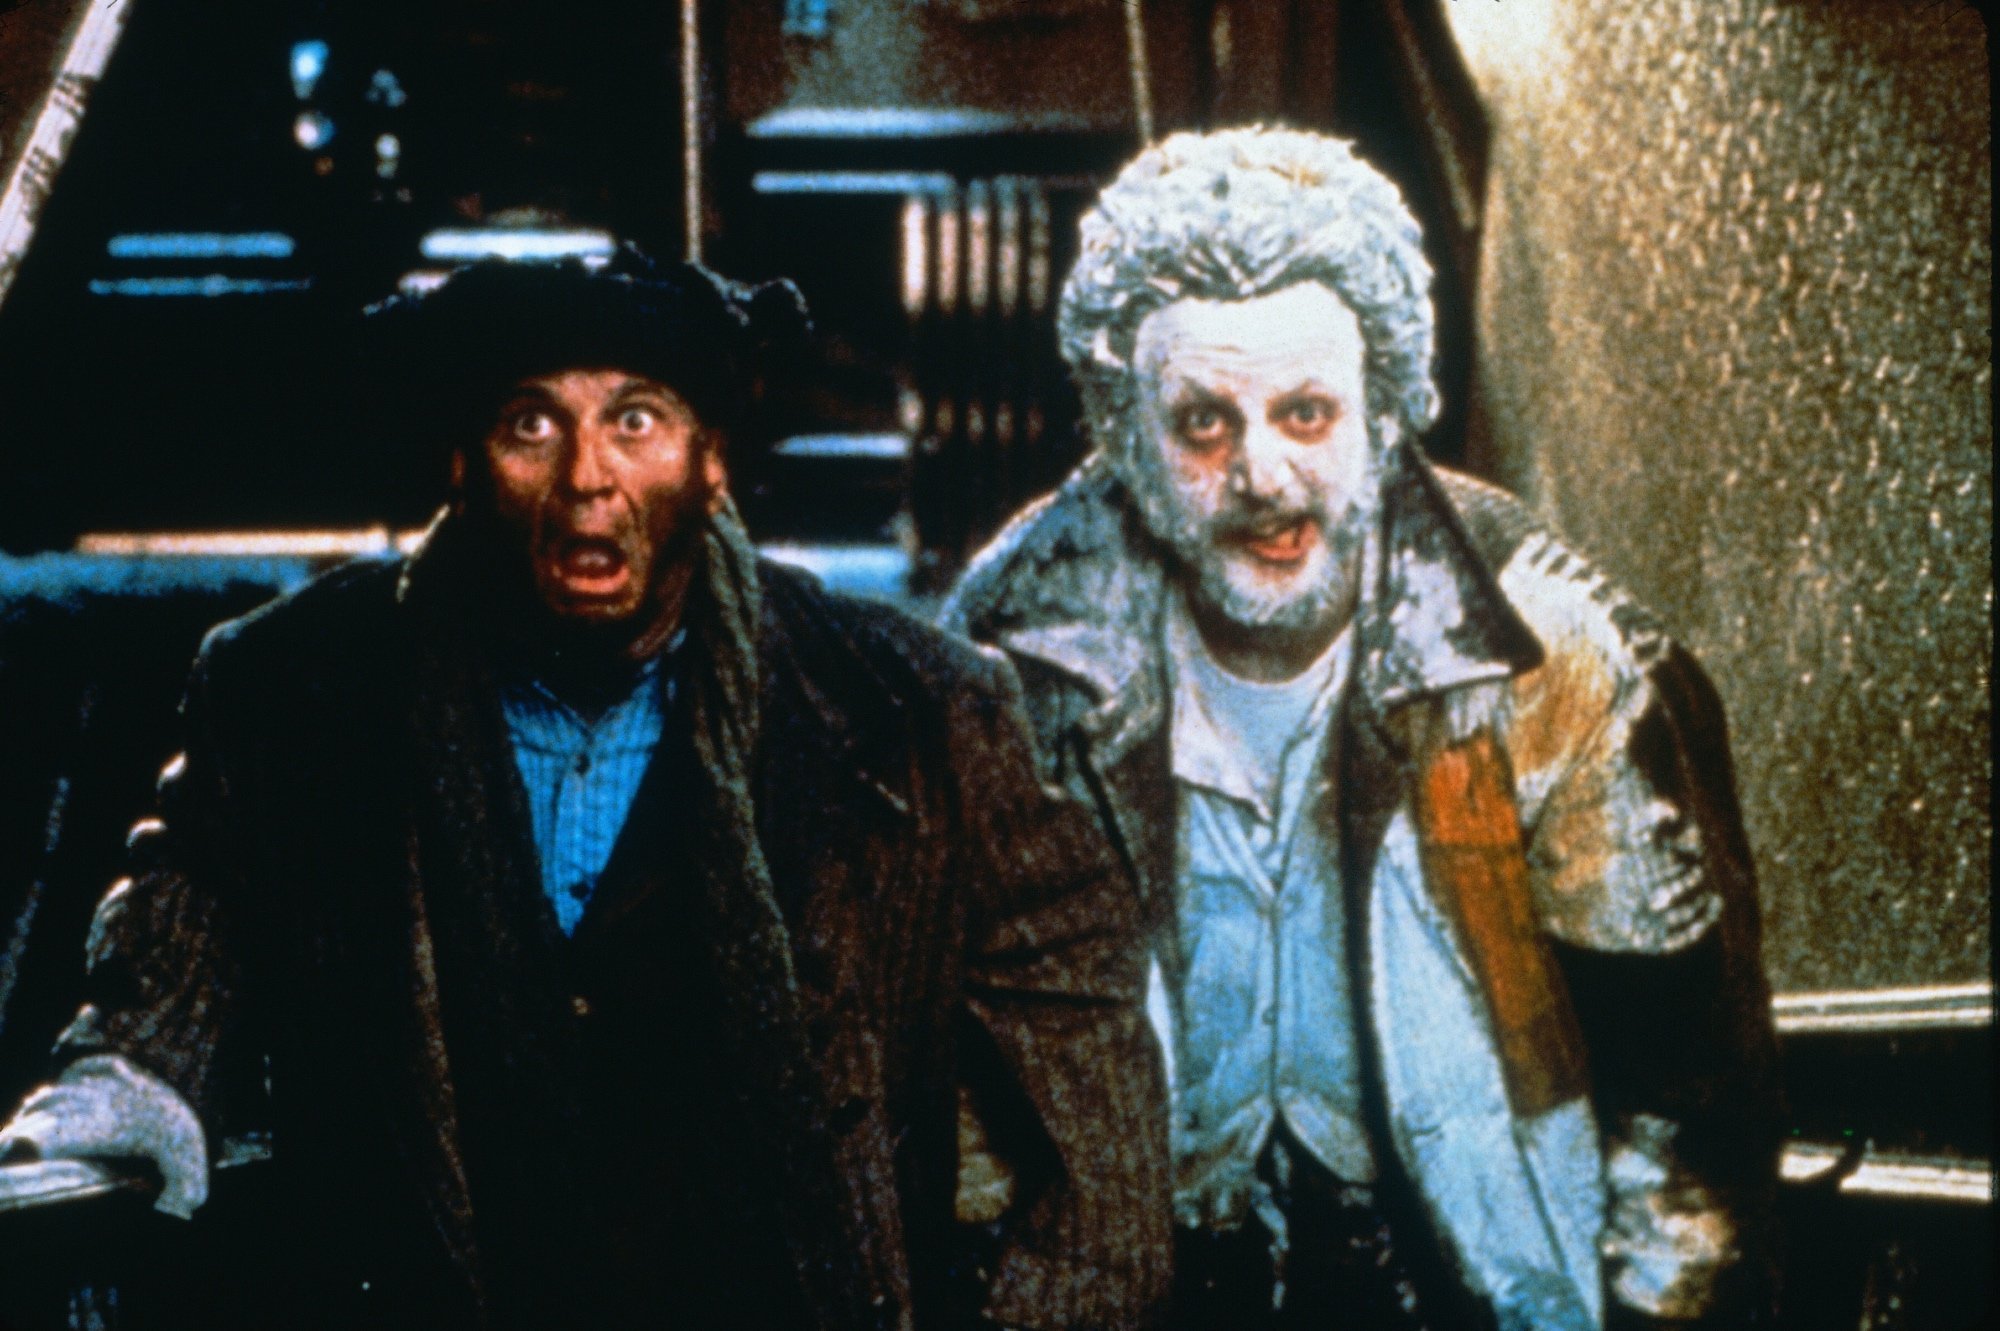 'Home Alone' Joe Pesci as Harry and Daniel Stern as Marv for article about tarantula standing with powdered face and hat burnt off